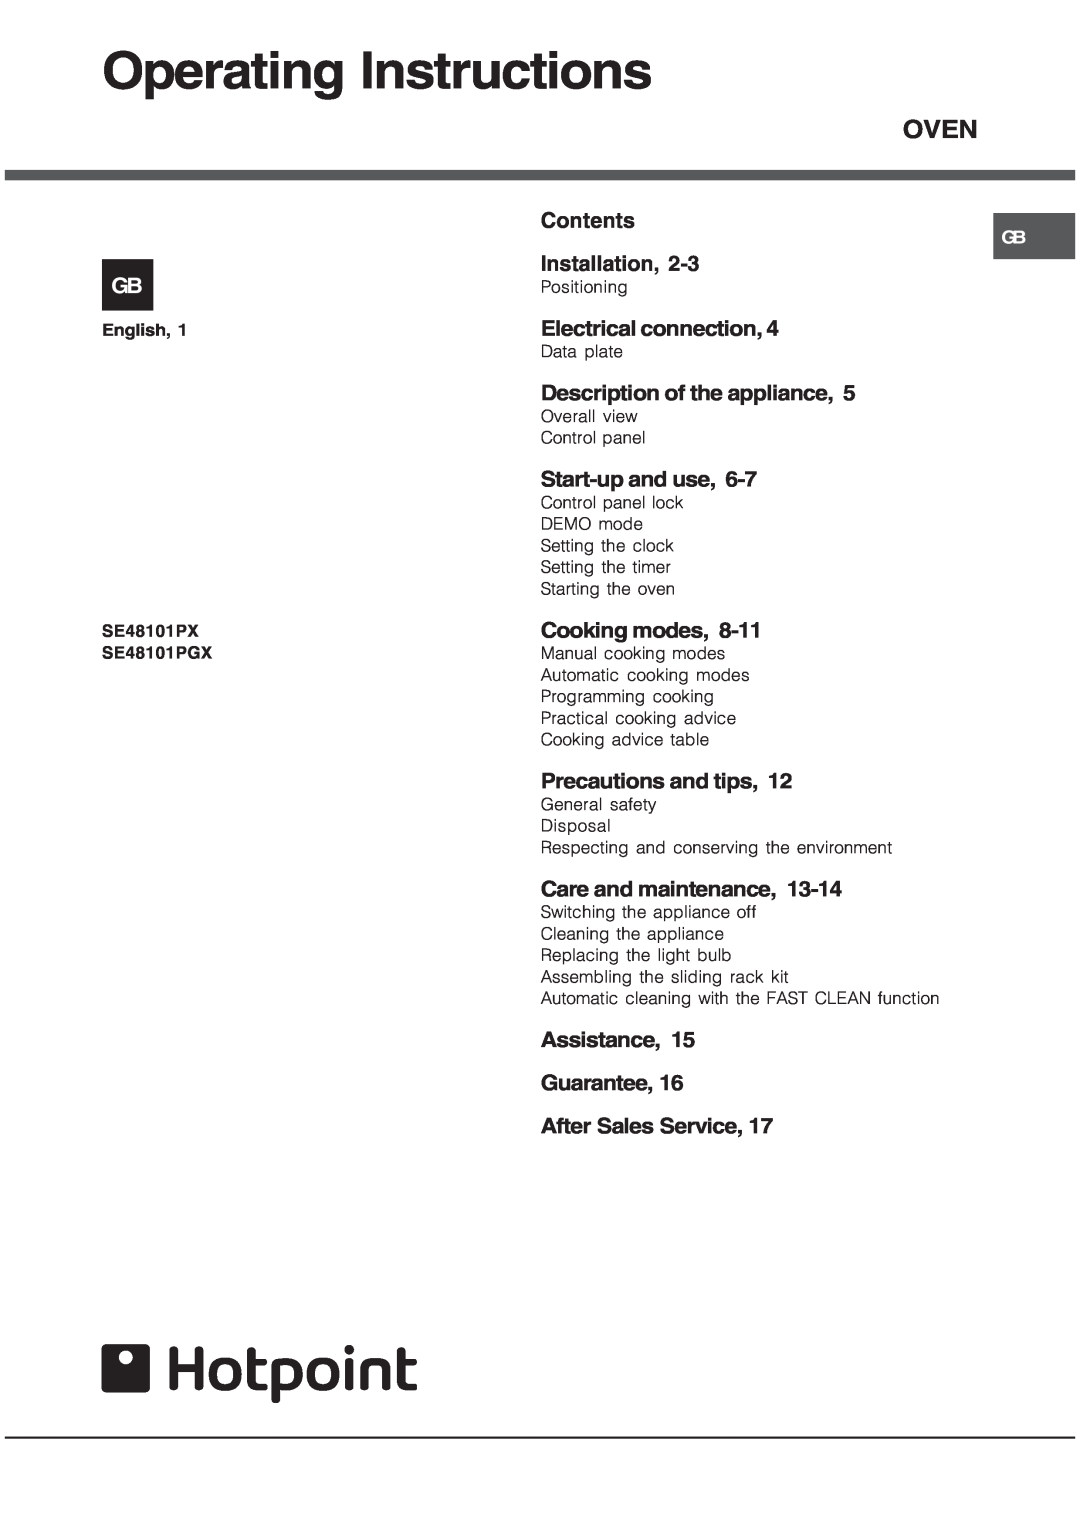 Hotpoint SE48101PGX manual Operating Instructions, Oven 